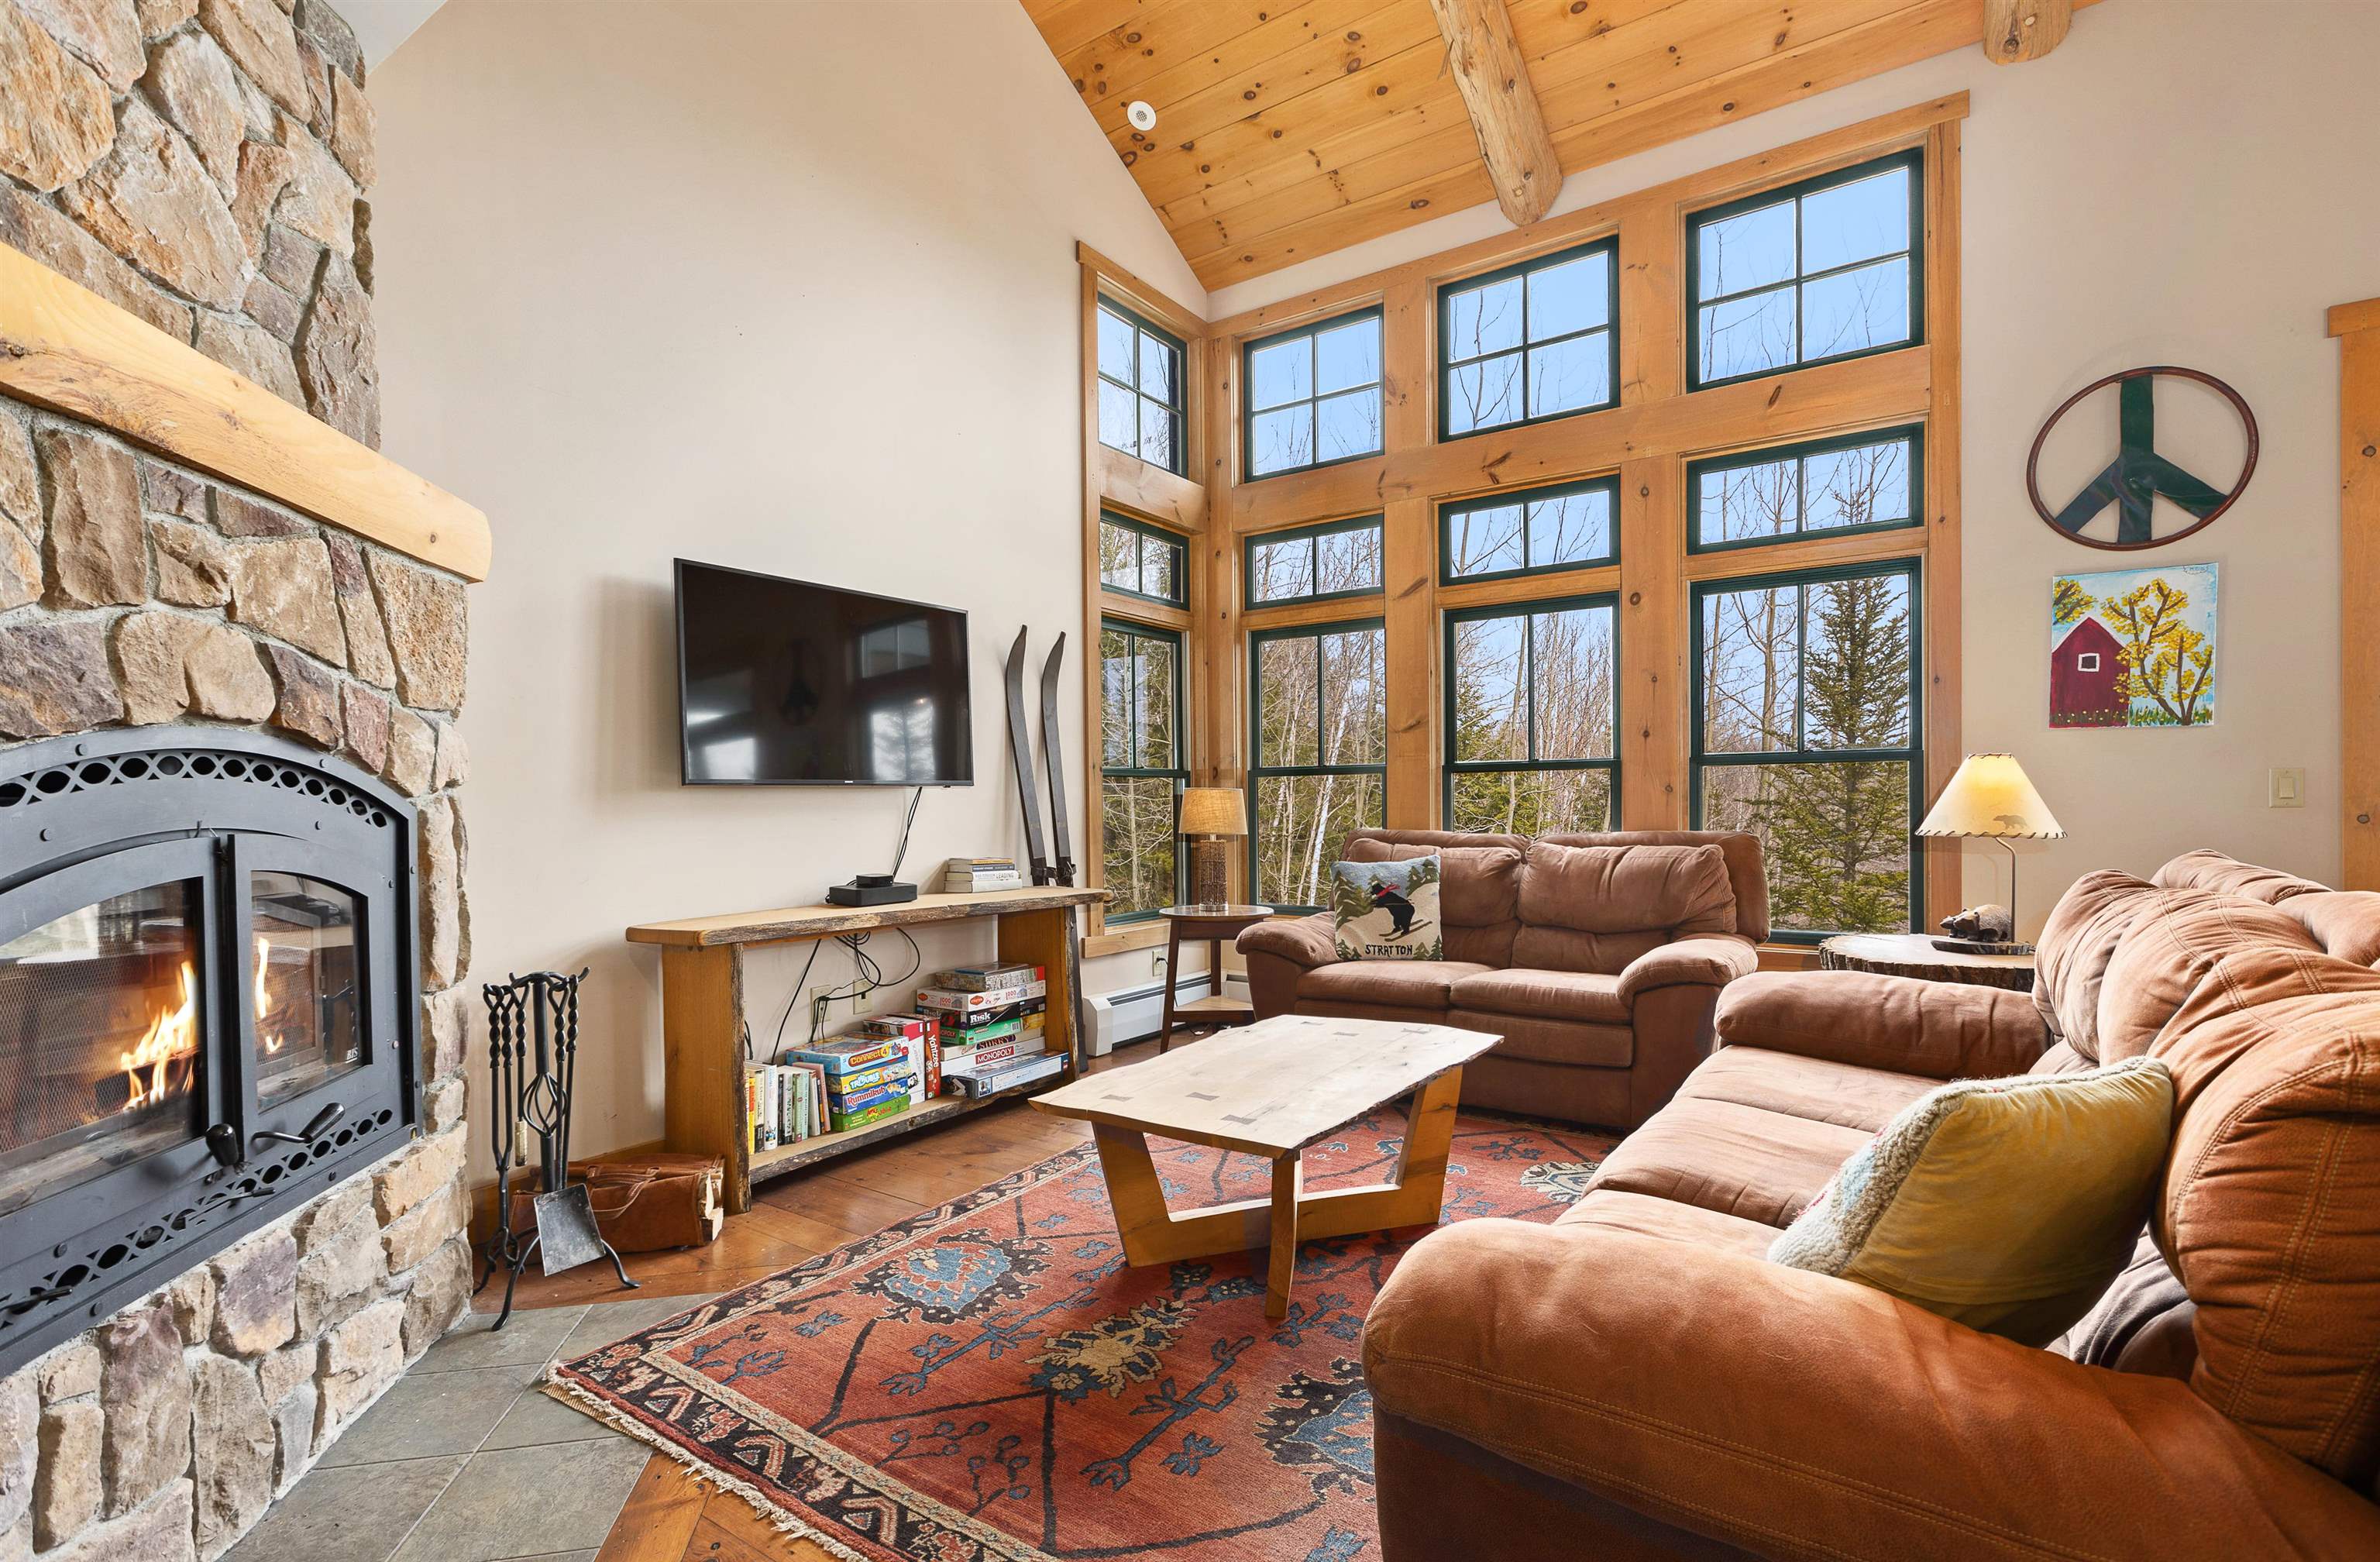 Welcome home to your Adirondack residence at the...